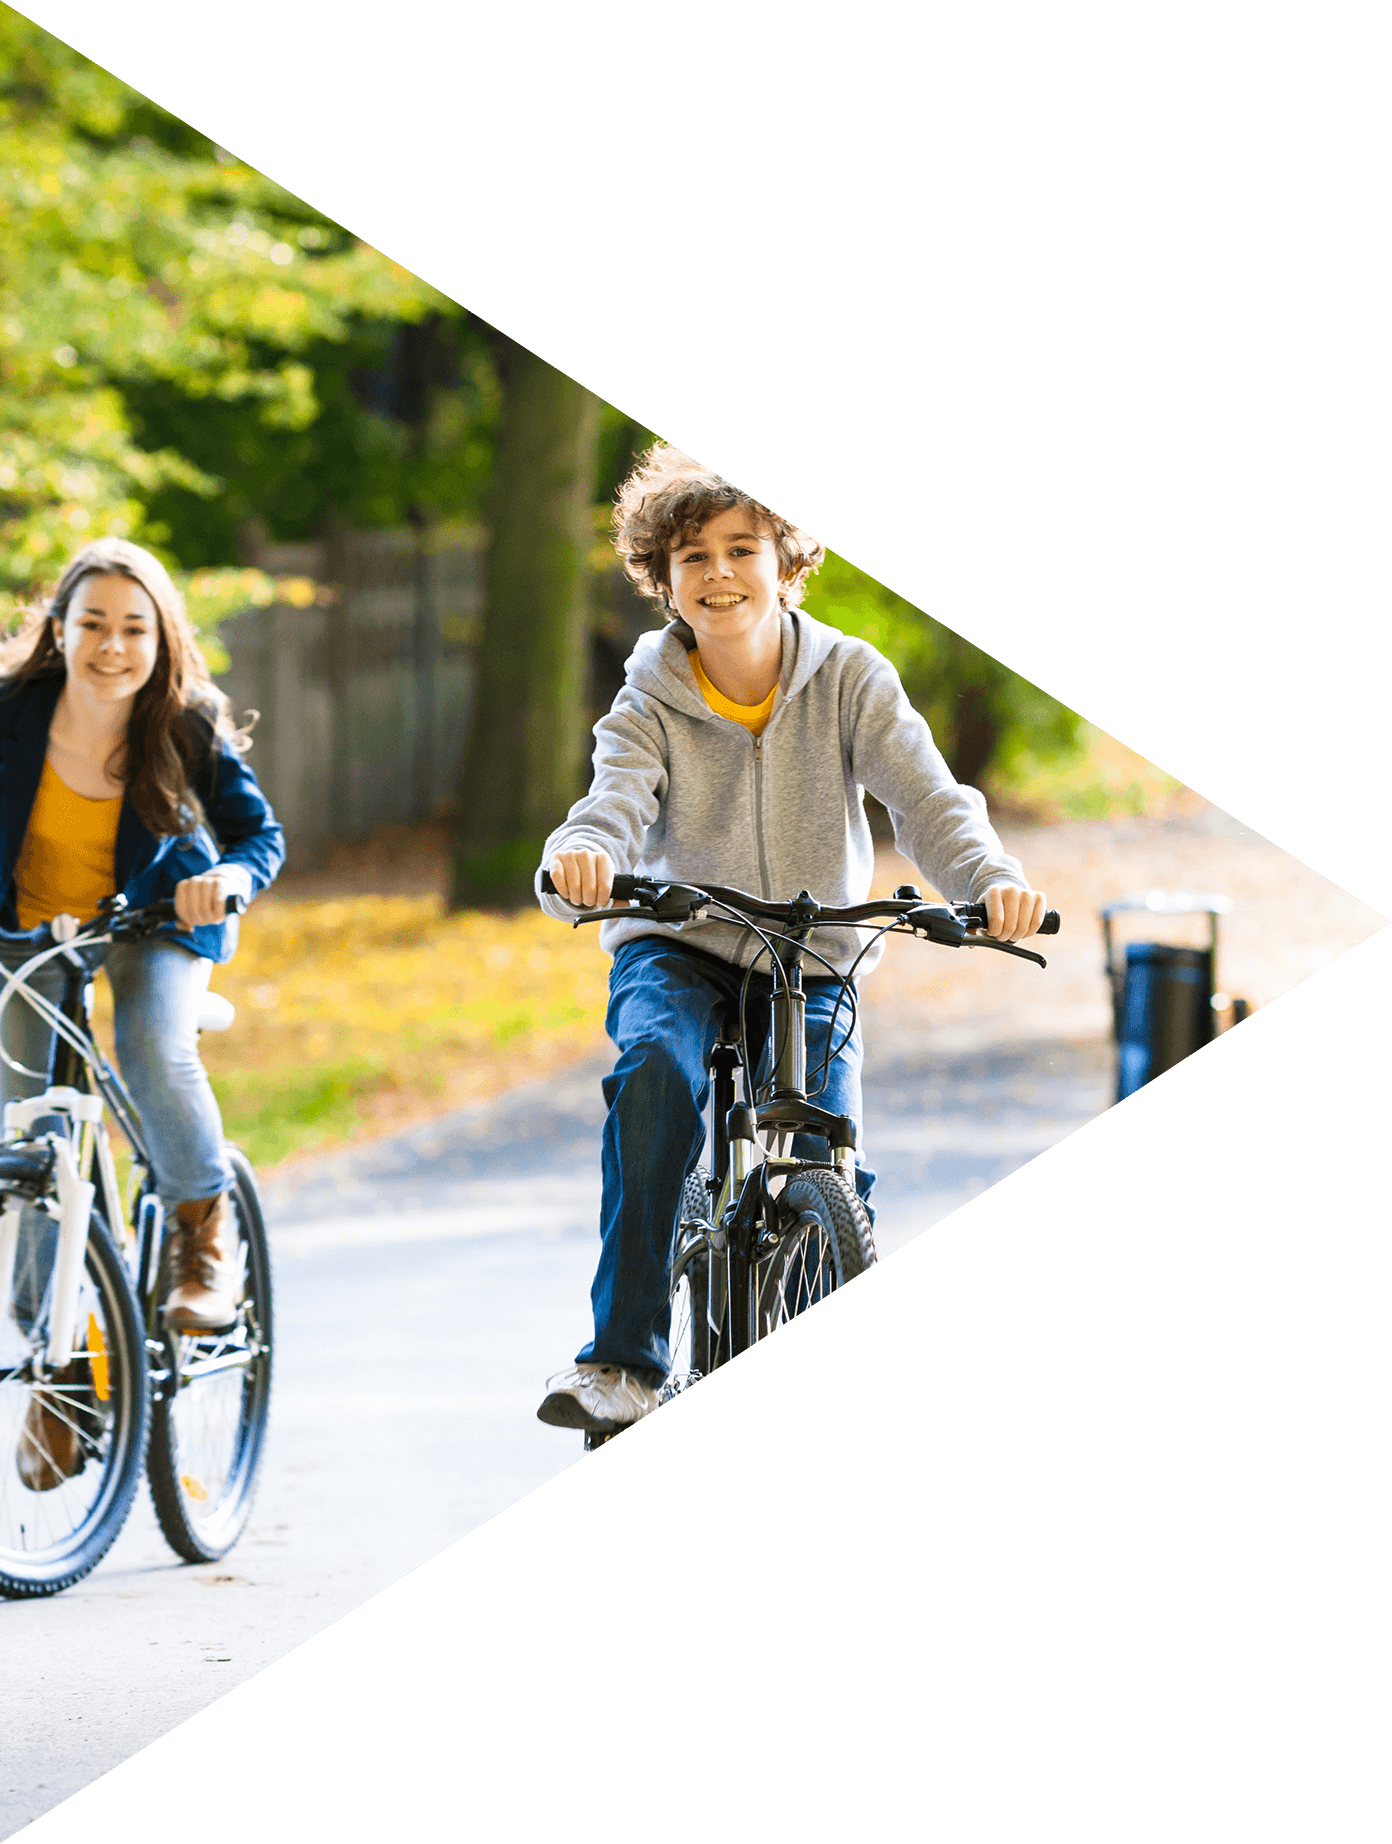 Image showing a girl and a boy riding bikes